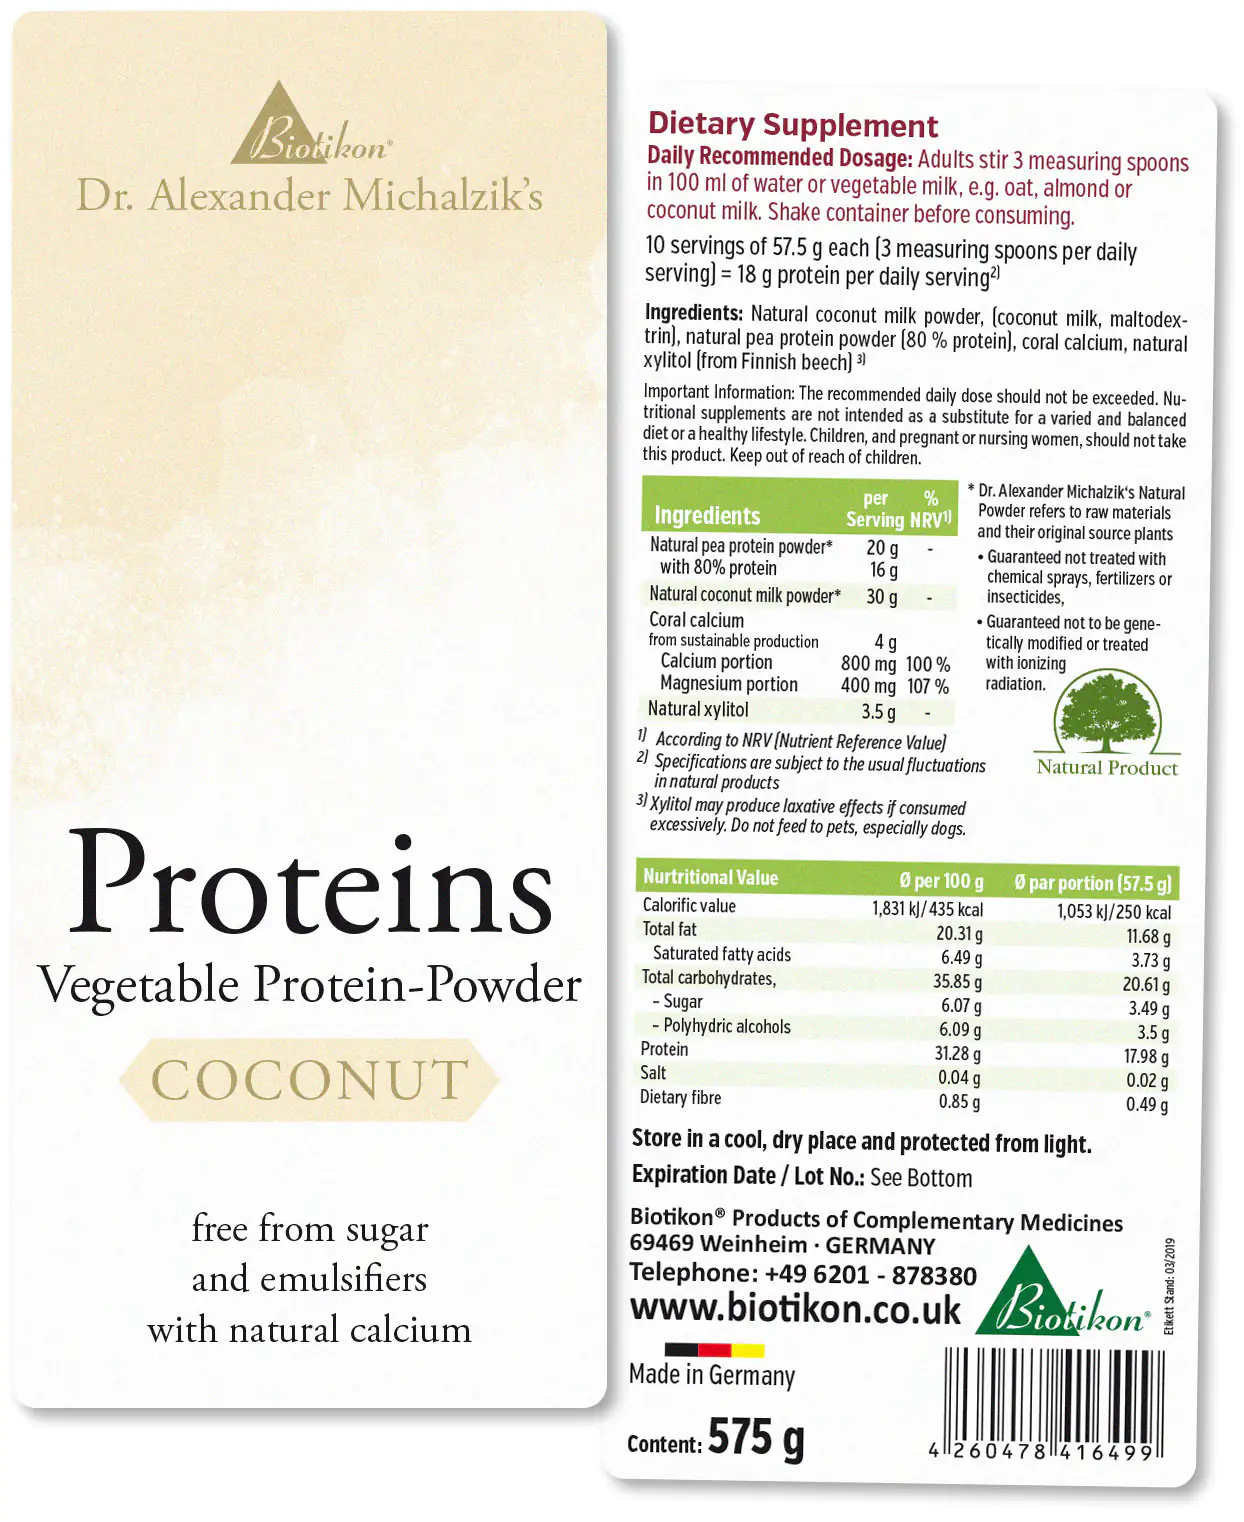 Protein - 2 pack, Aronia + Coconut